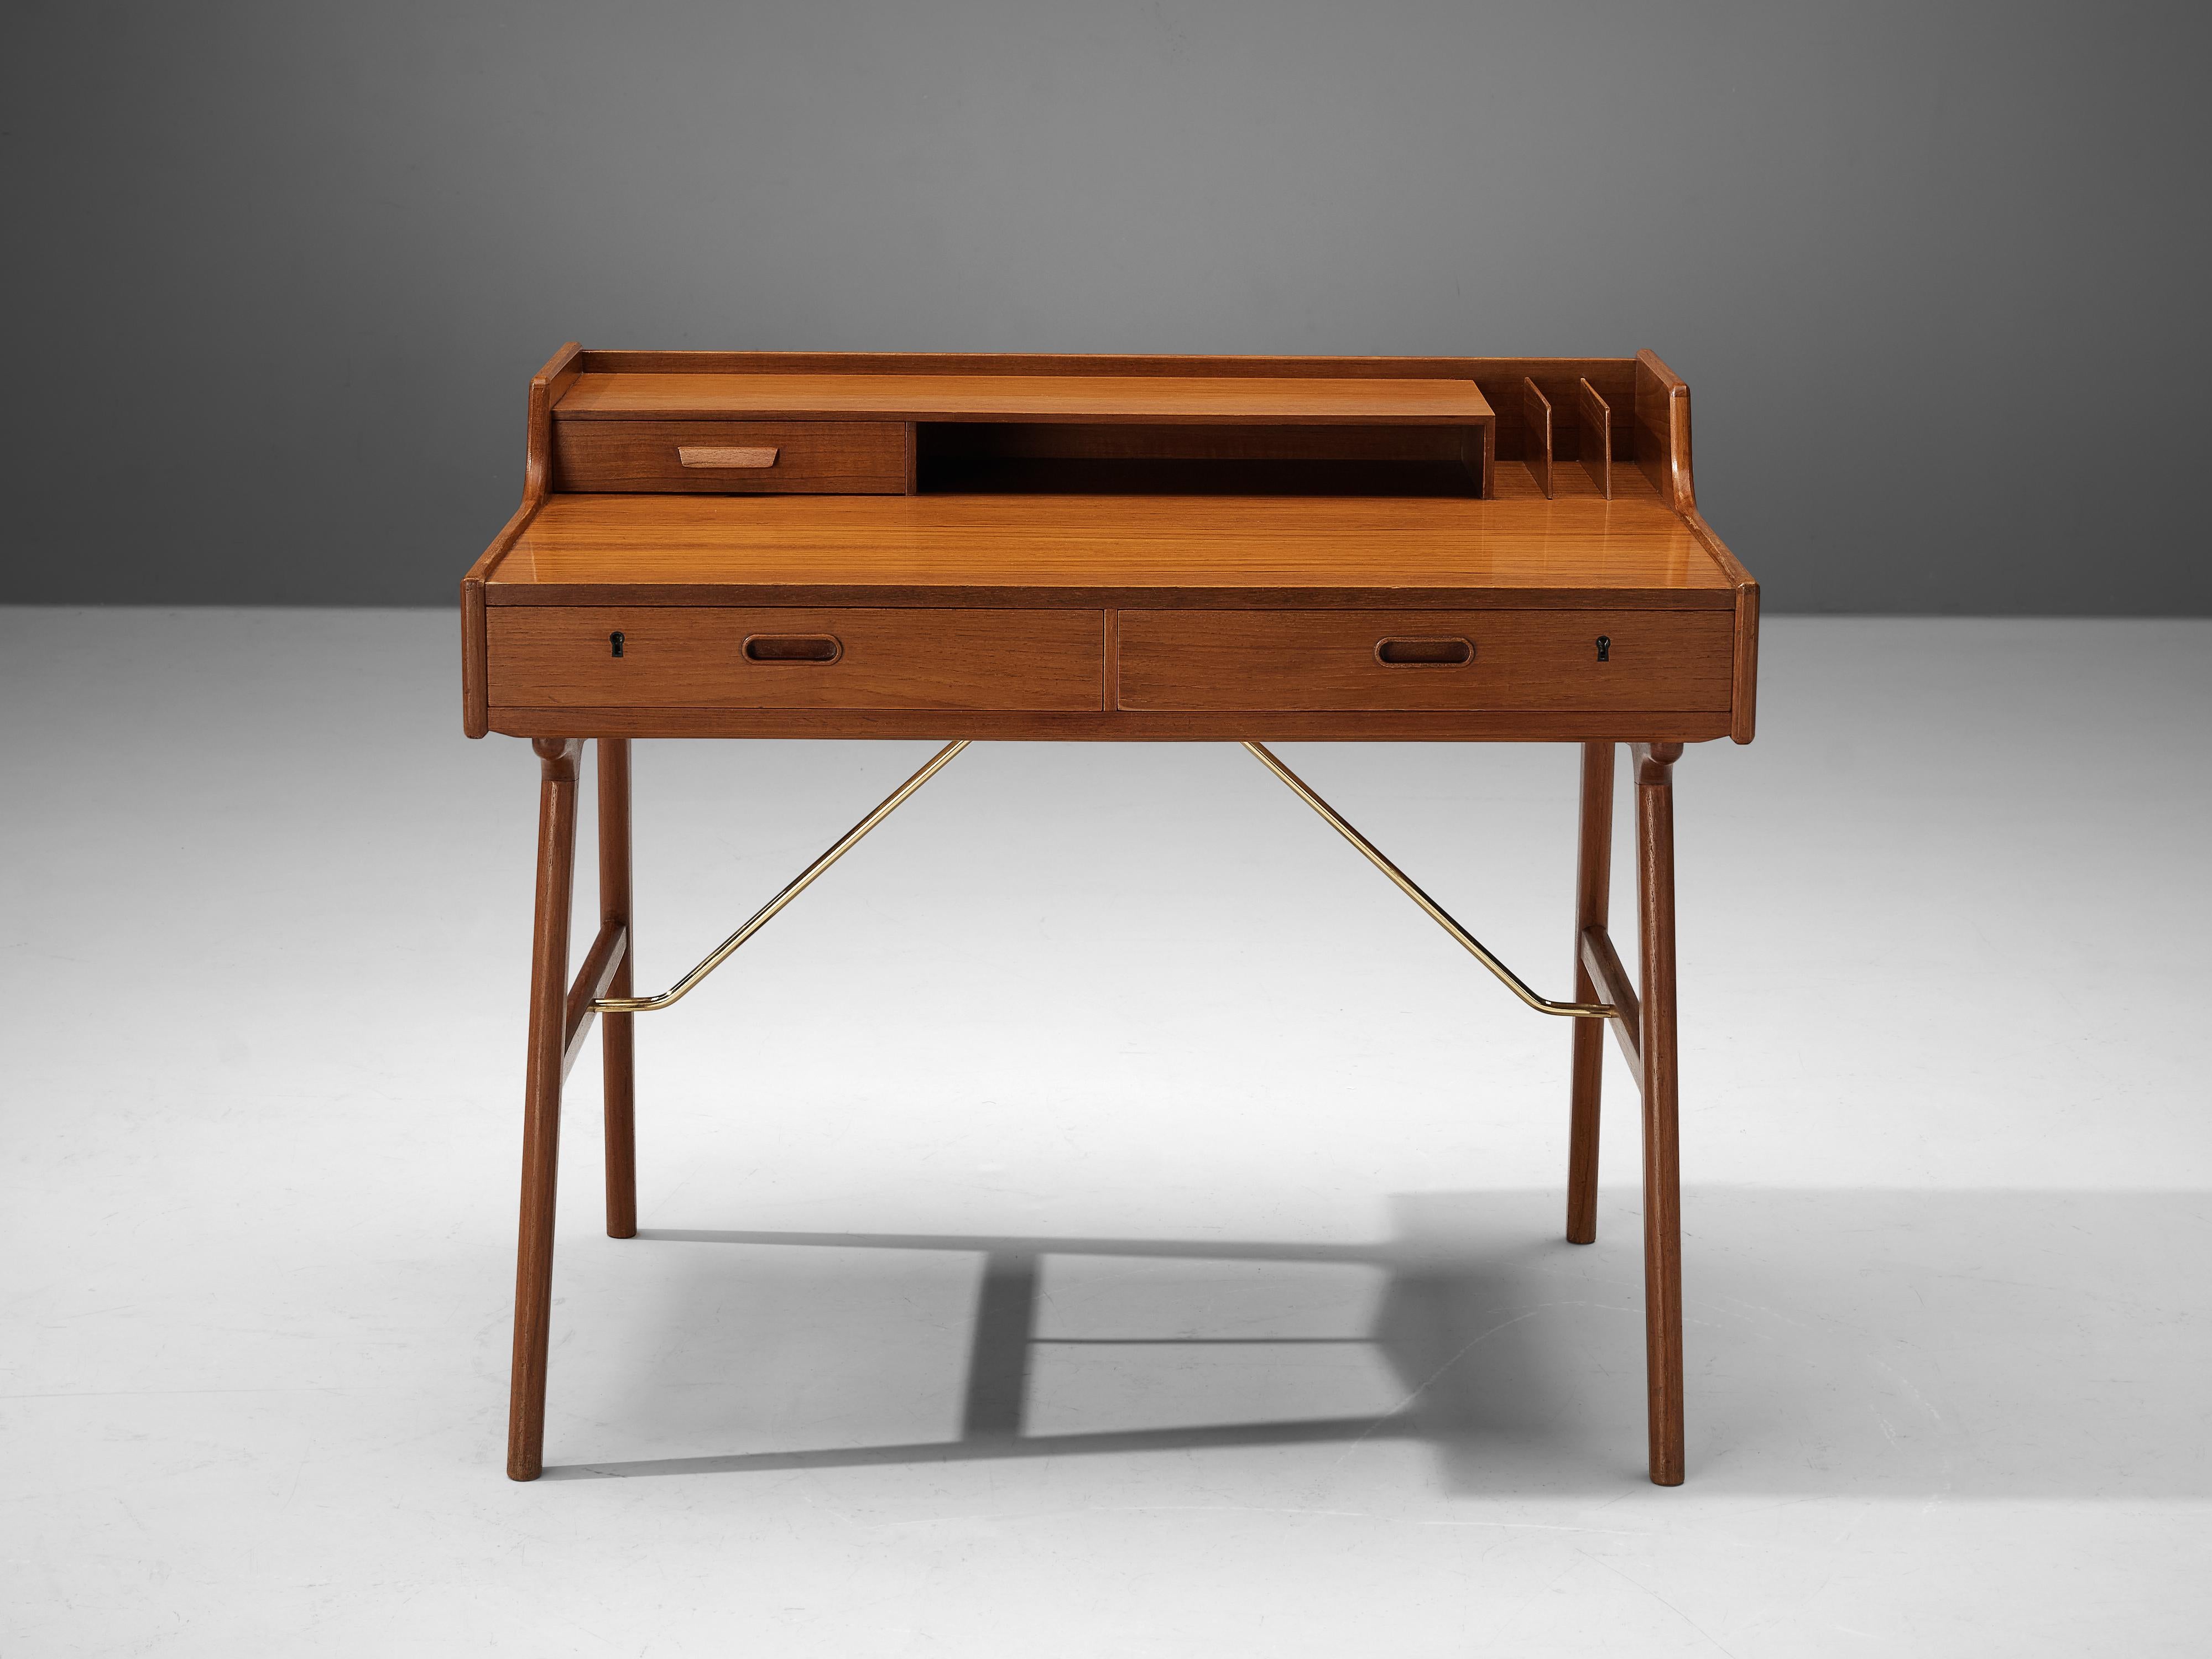 Arne Wahl Iversen for Vinde Møbelfabrik, desk model 65, teak, Denmark, circa 1961.

Refined desk table by Danish designer Arne Wahl Iversen. This small writing table has a beautiful open look due the high cylindrical legs. The table with two